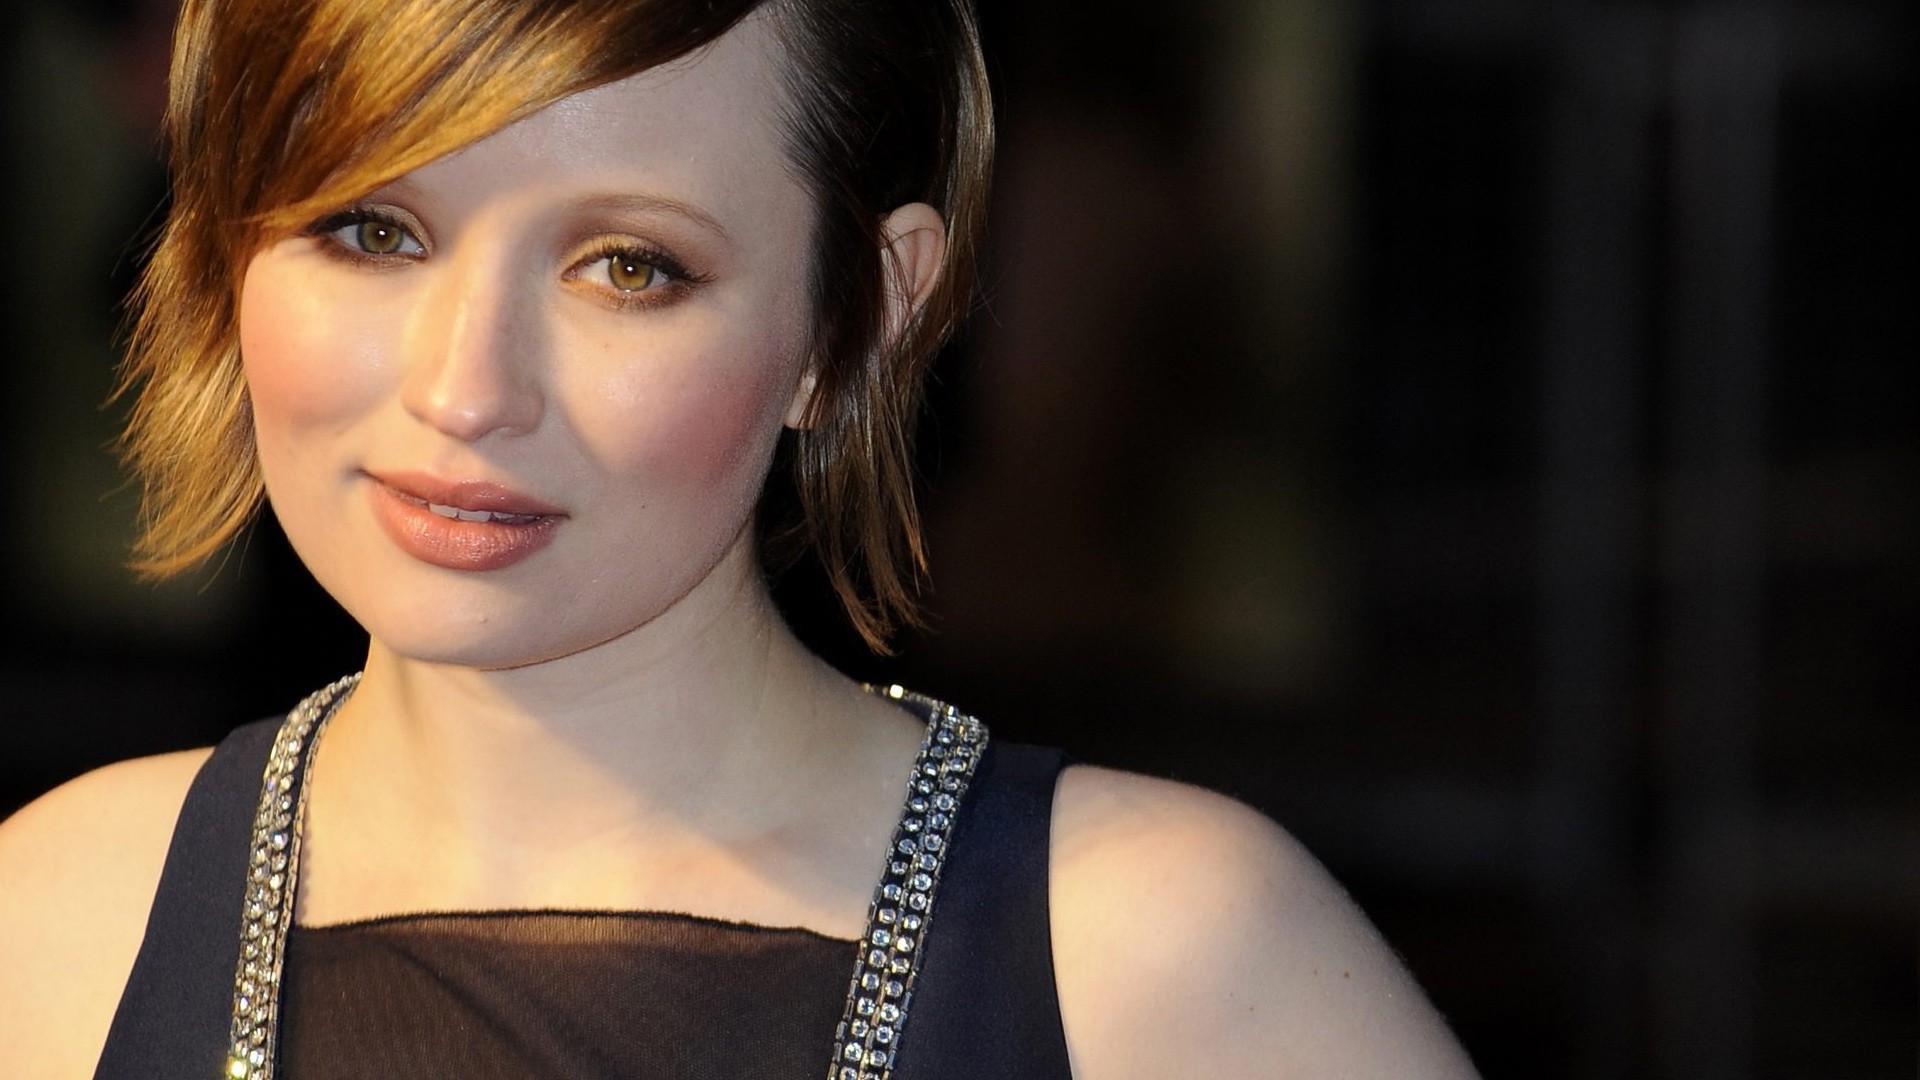 Emily Browning Wallpaper Image Photos Pictures Background